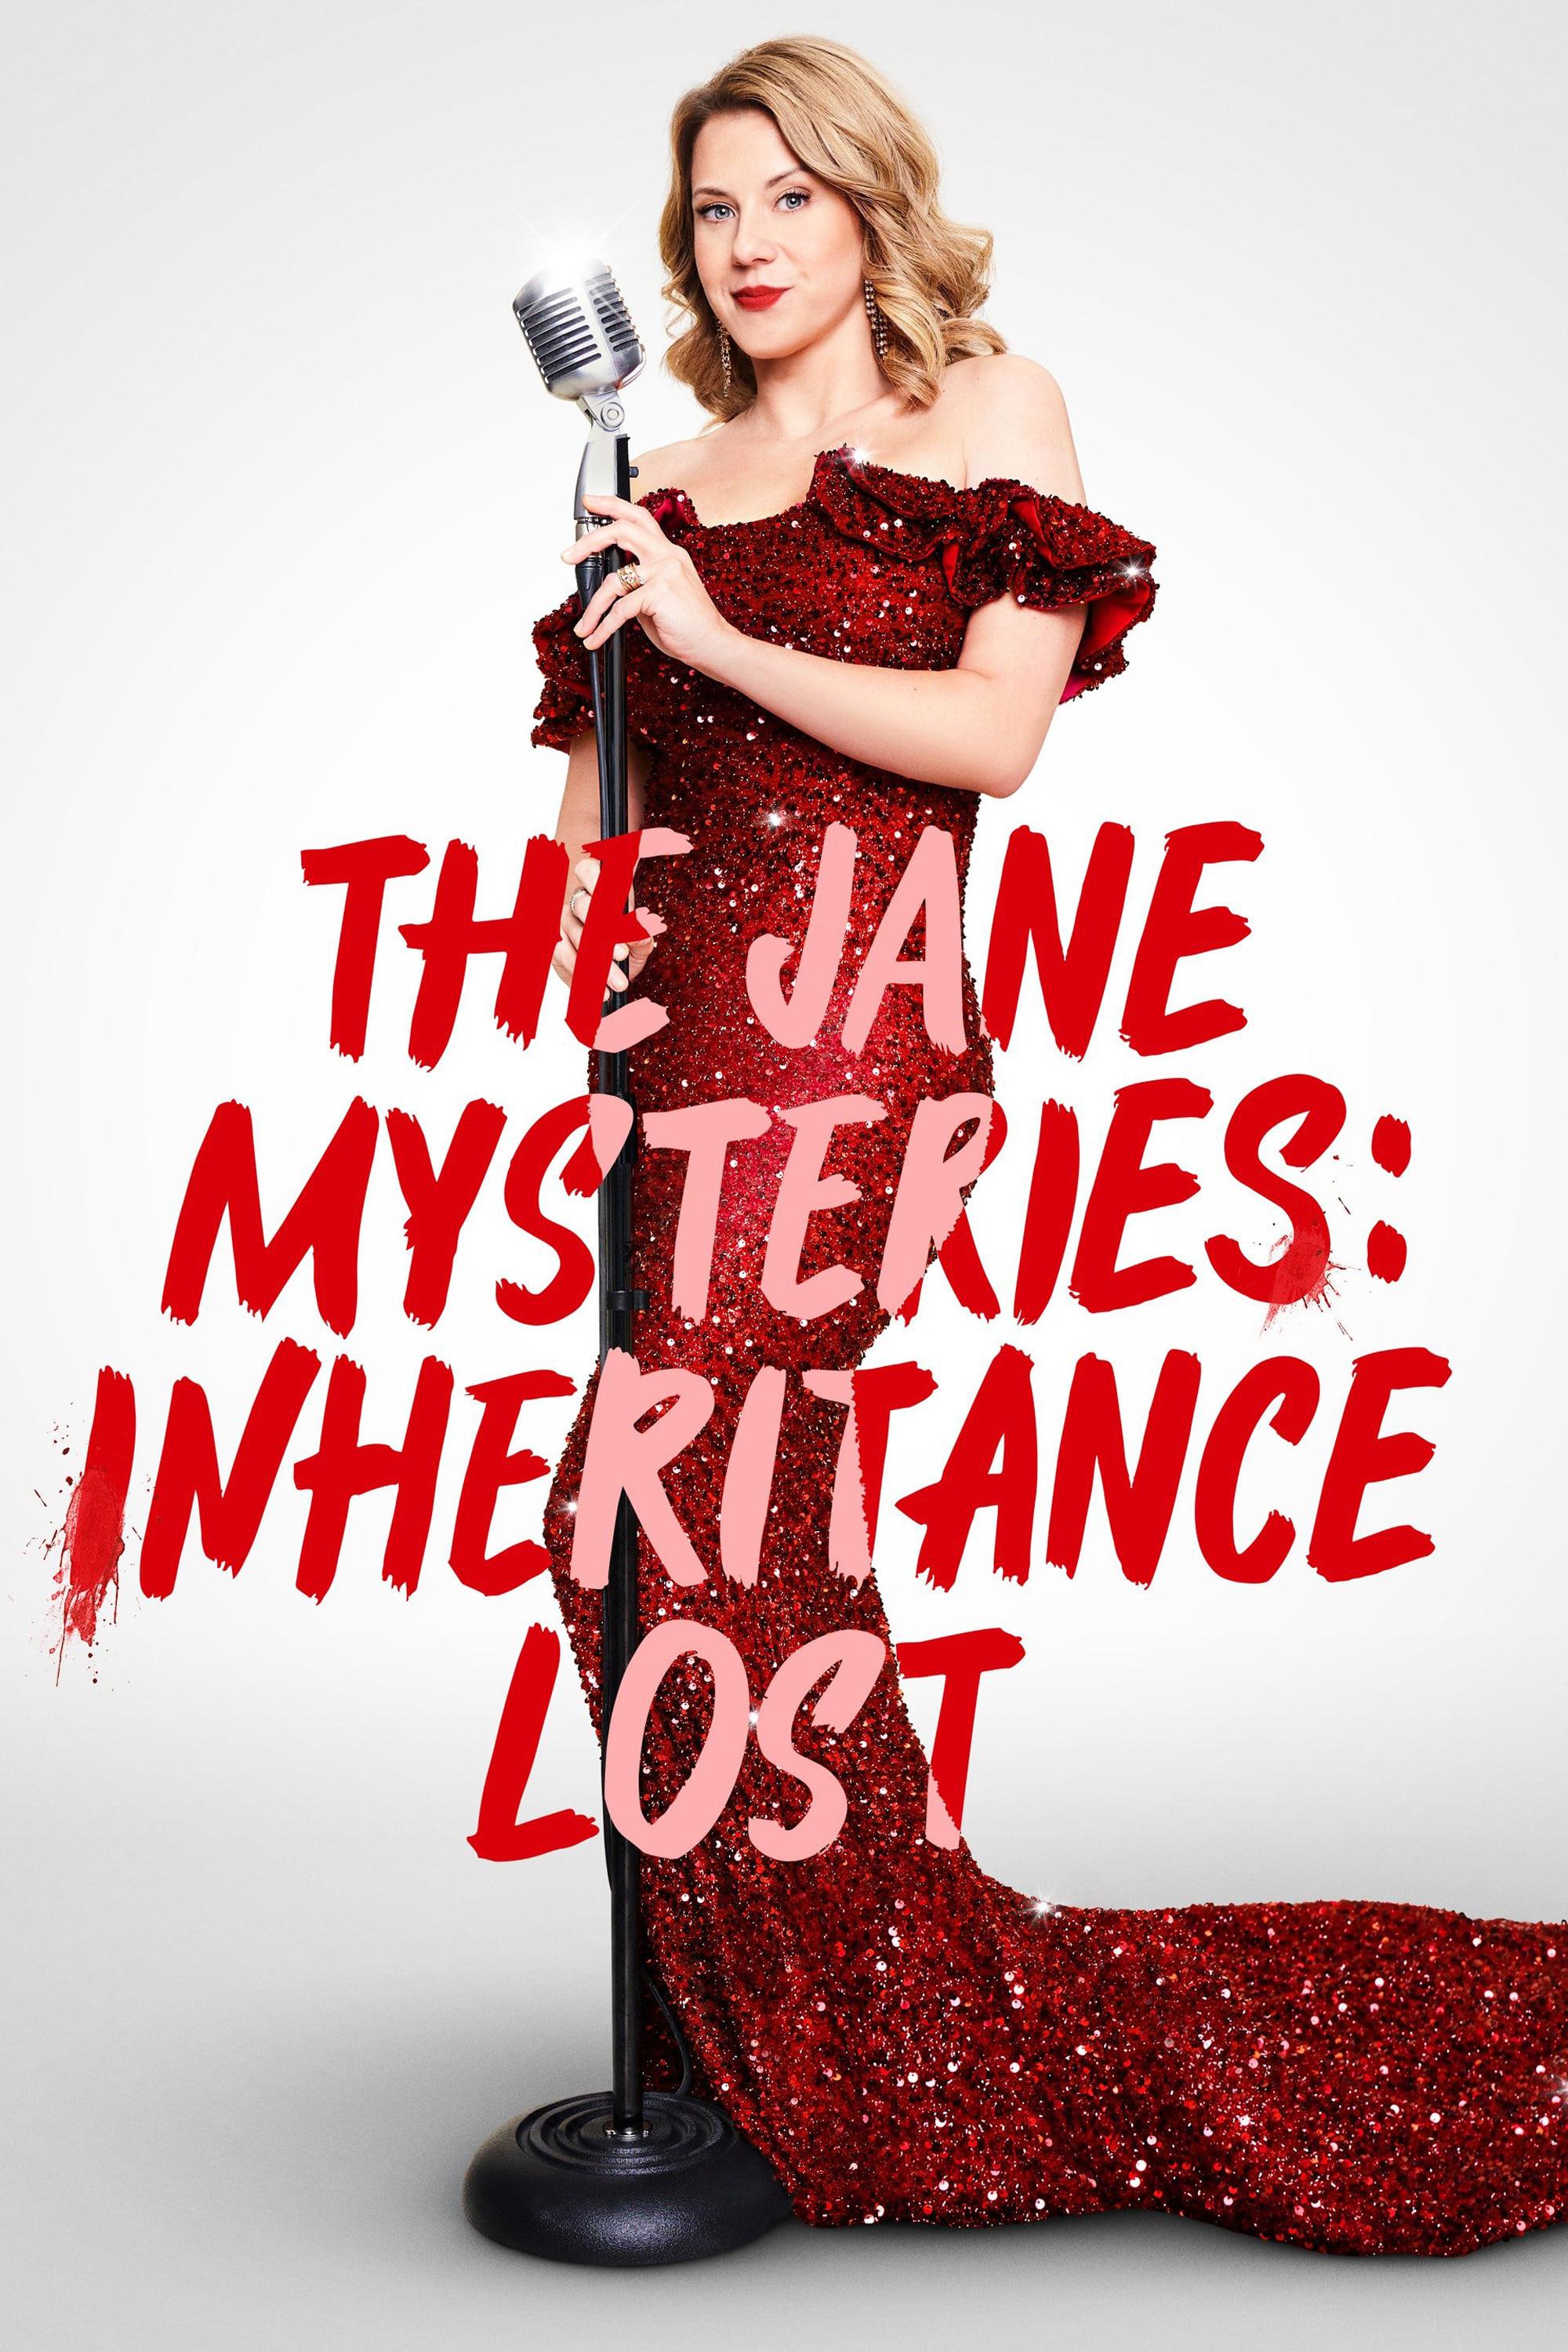 The Jane Mysteries: Inheritance Lost poster